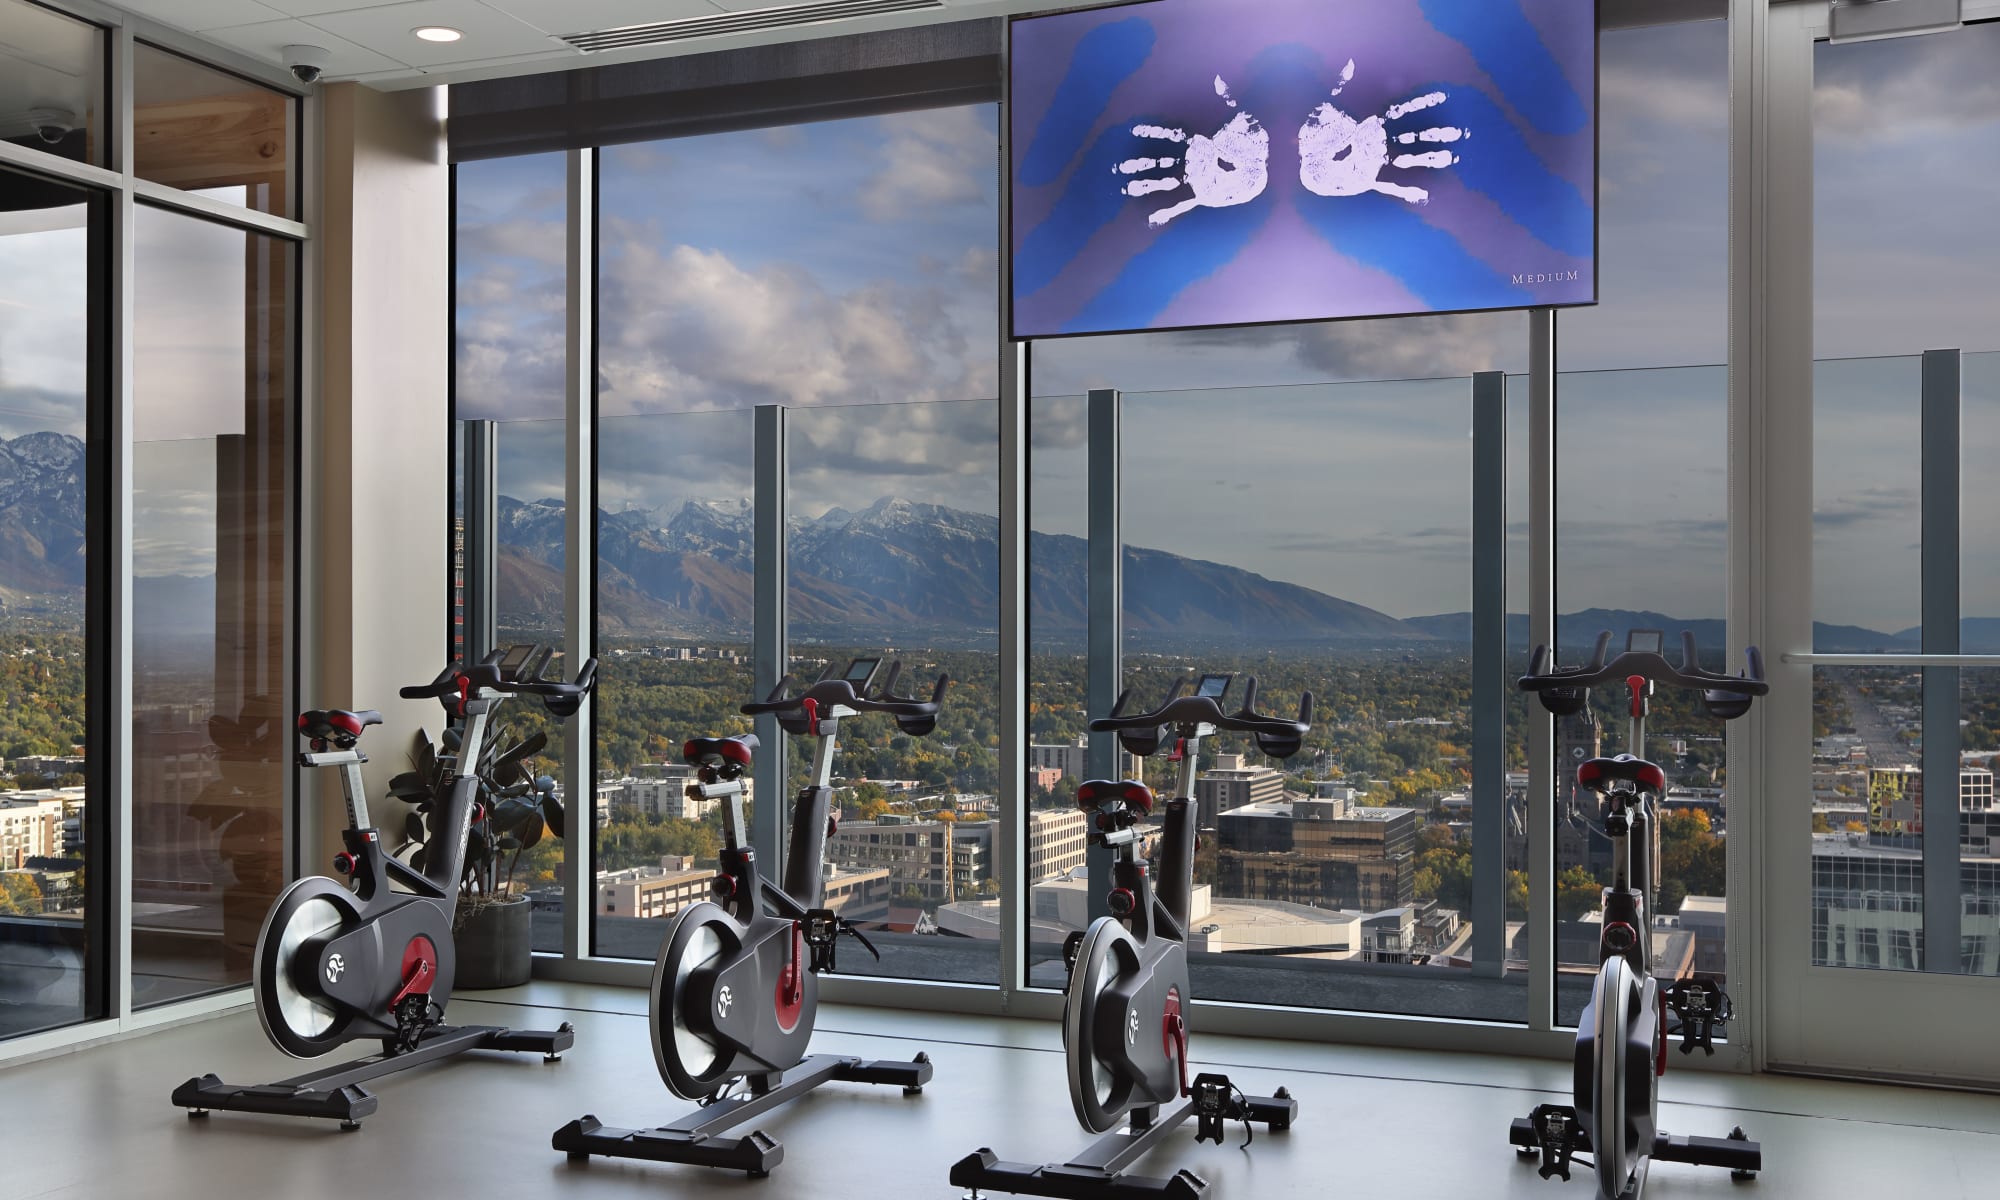 Workout studio with spin bikes and television with windows overlooking the mountains at Luxury high-rise community of Liberty SKY in Salt Lake City, Utah